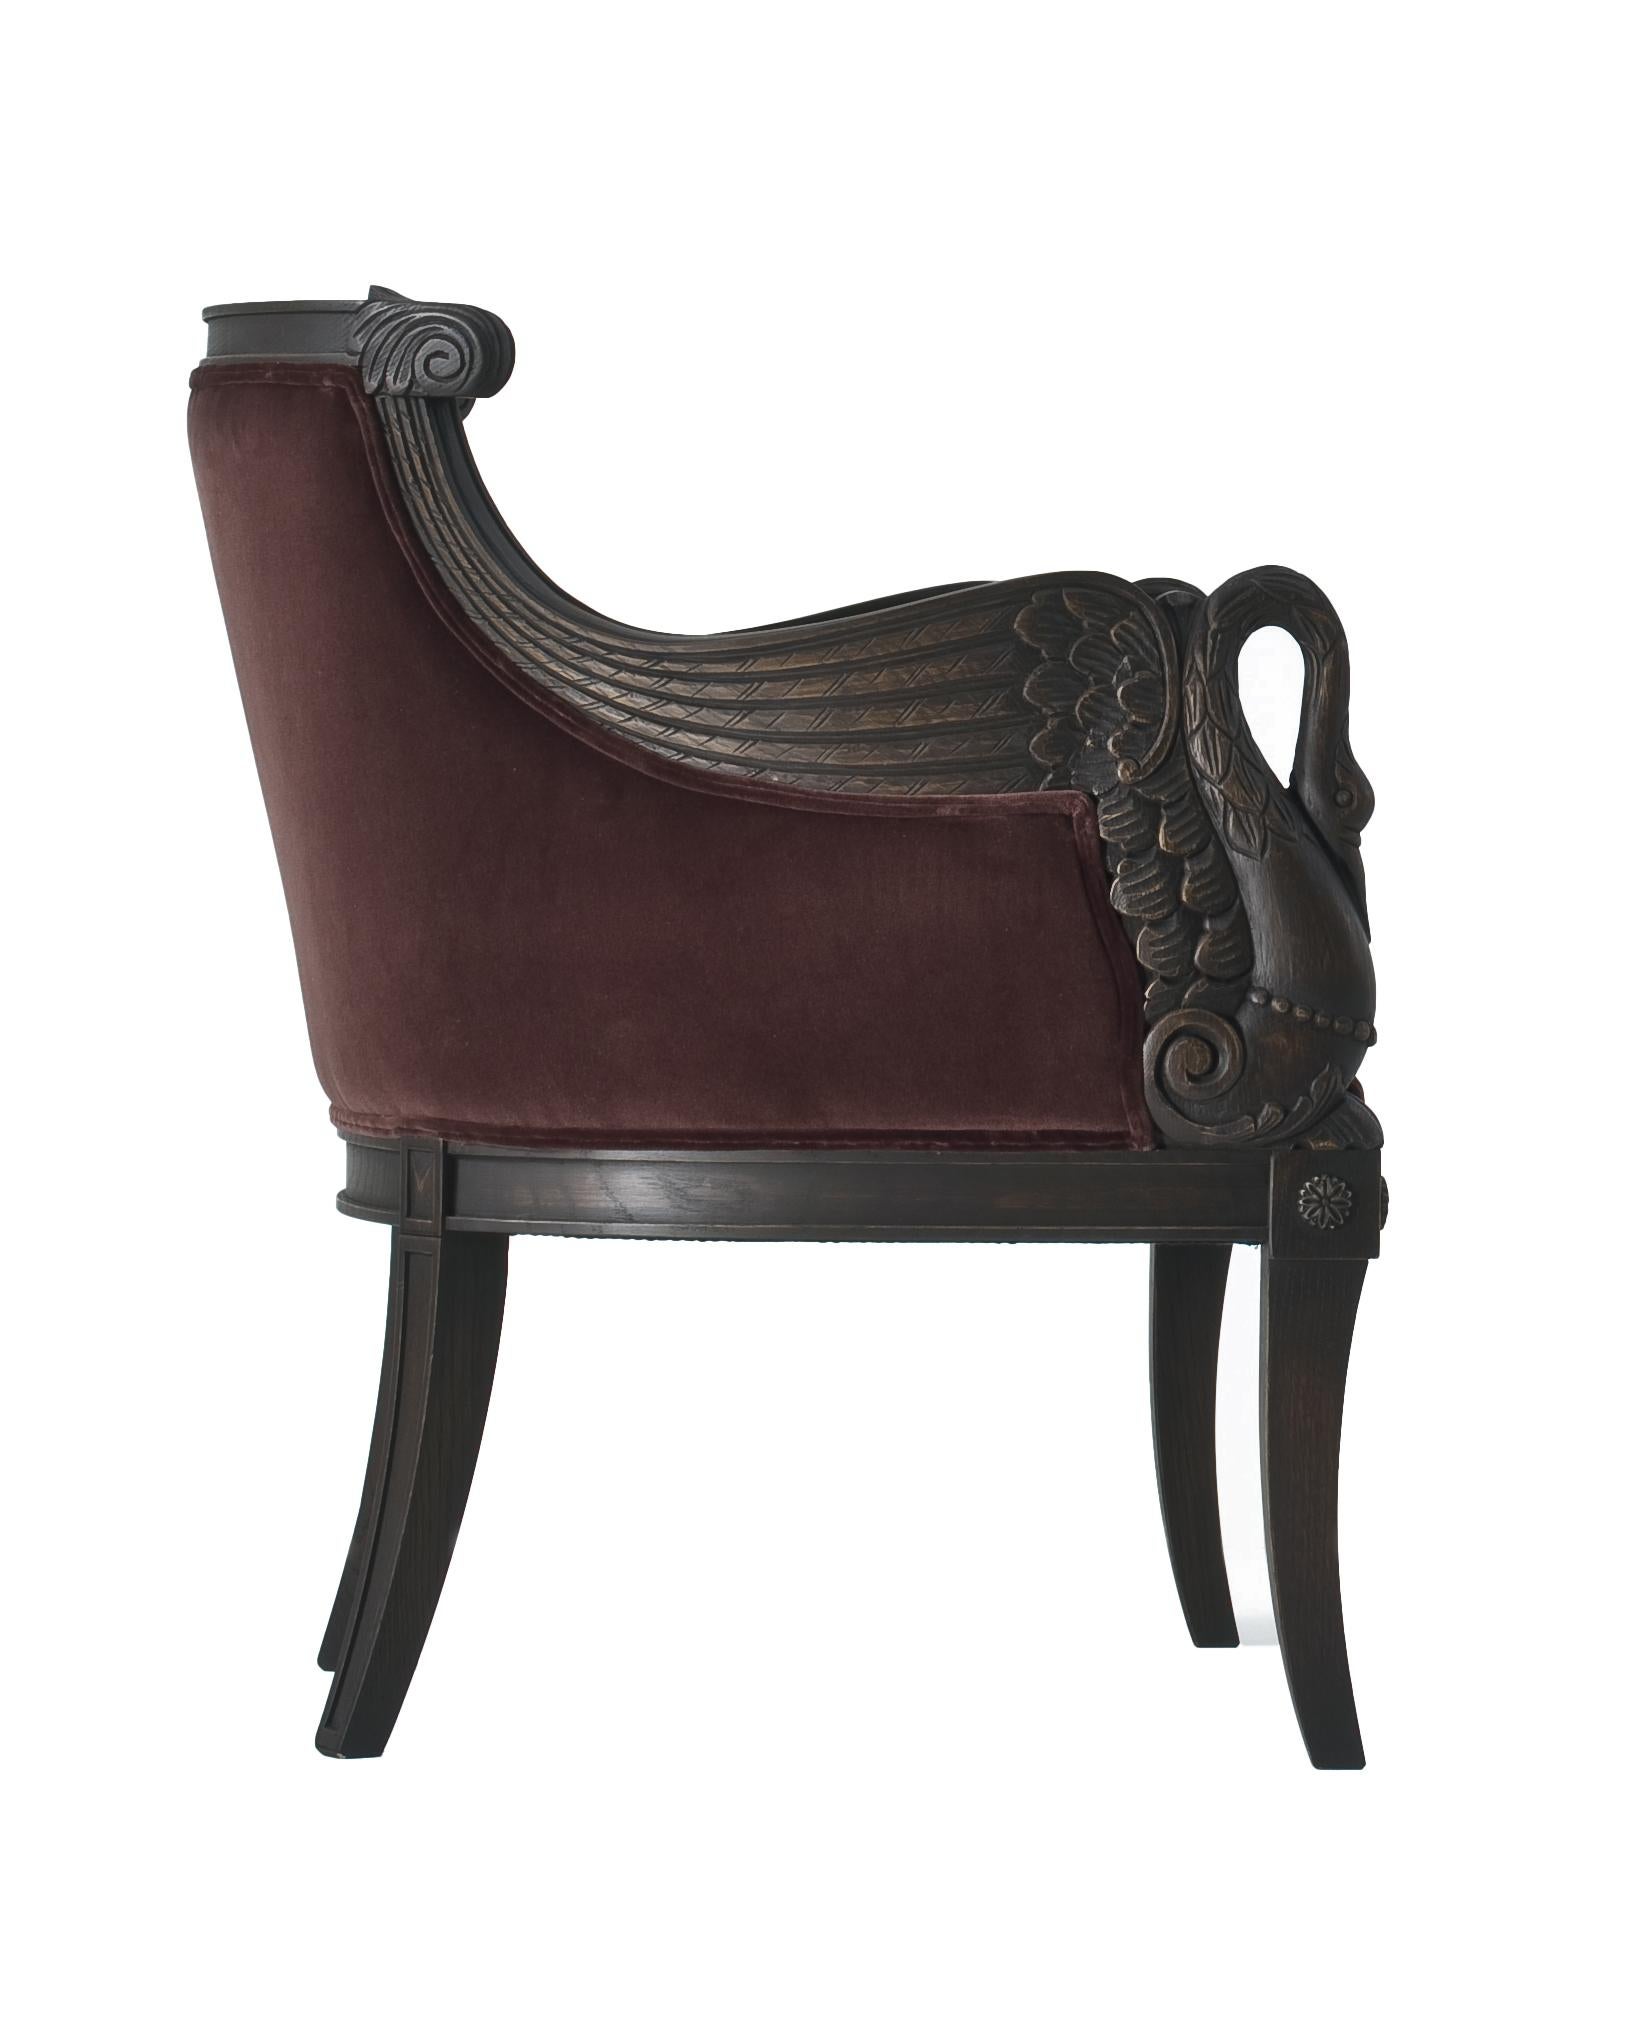 Adorned with intricately hand-carved swans on its armrests, Marie is an Italian masterpiece crafted from solid wood with a rich carrubo finish. Wrapped in luxurious brown velvet, this chair seamlessly combines artistry with comfort, inviting you to